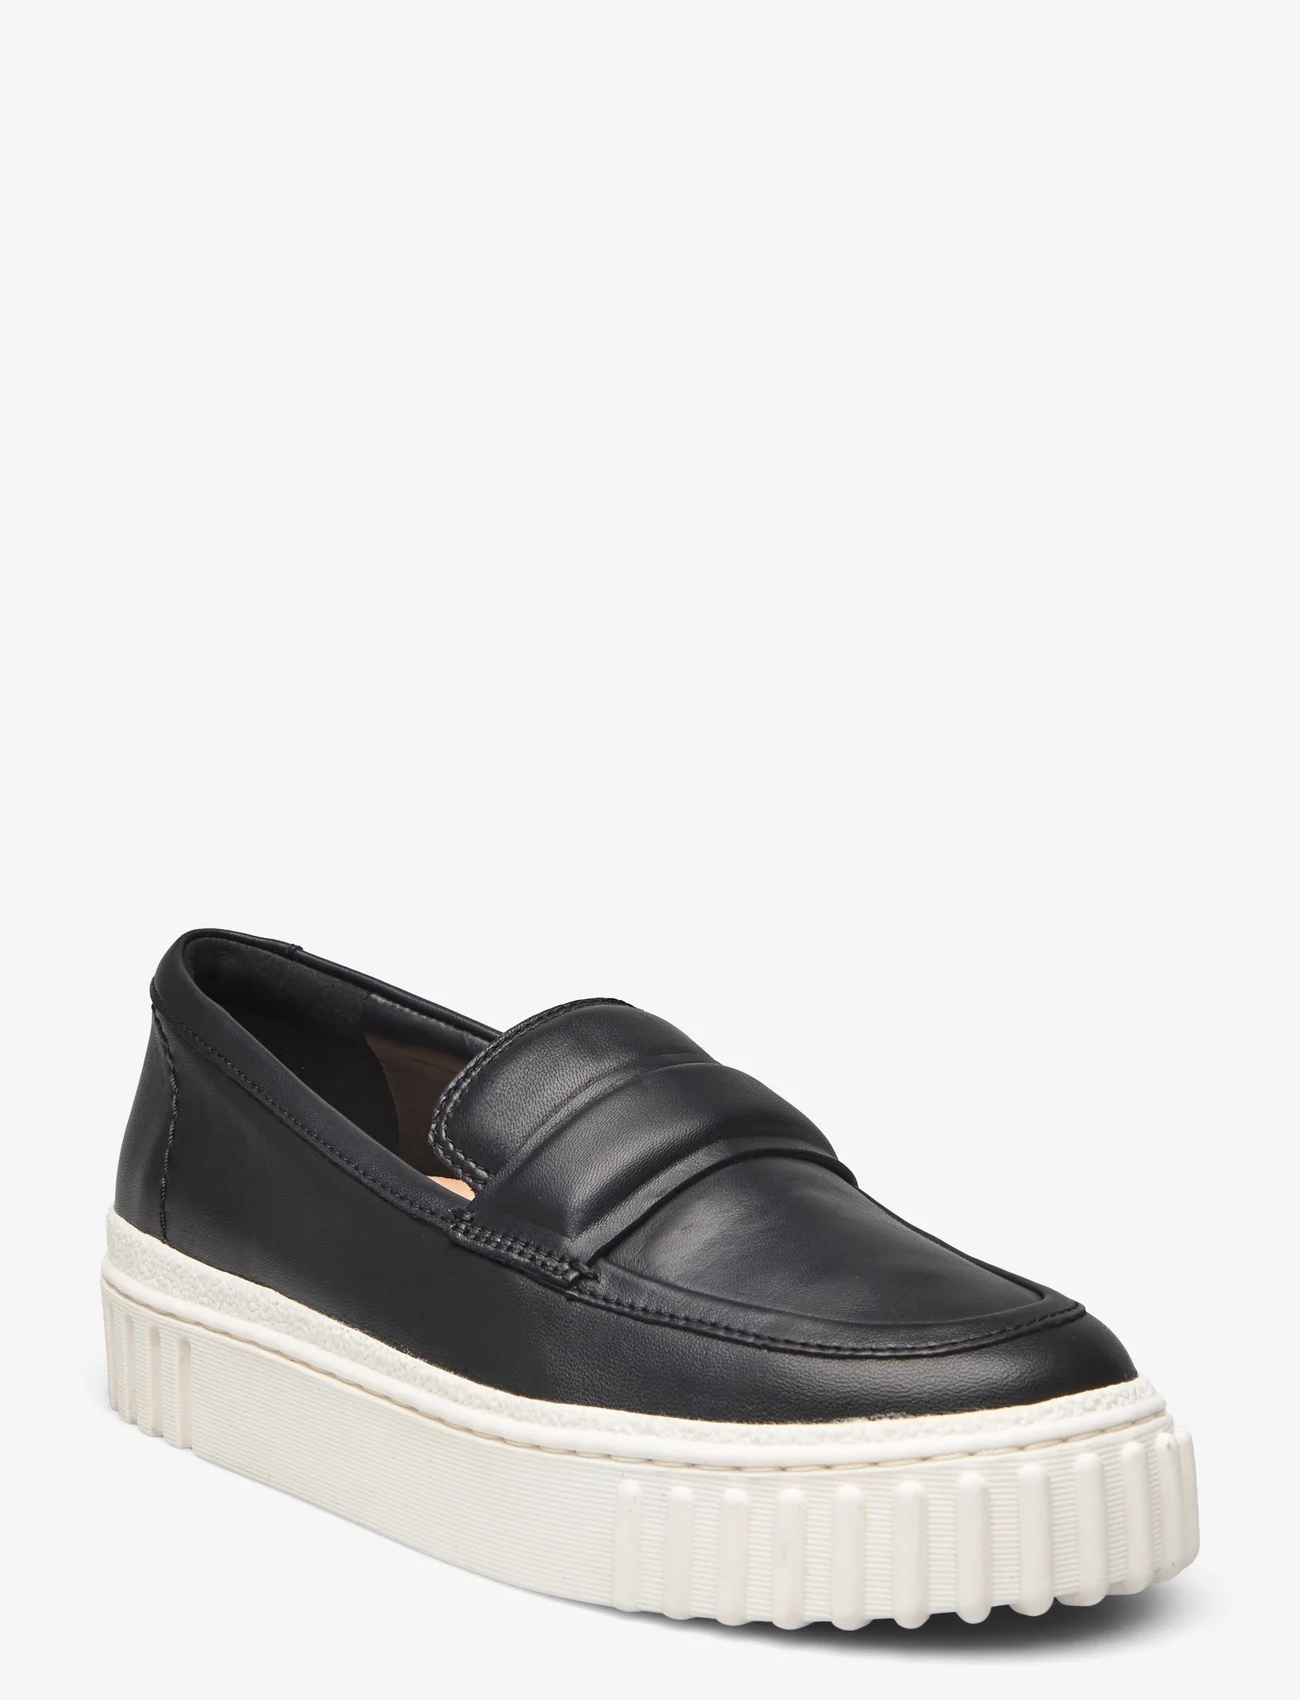 Clarks - Mayhill Cove D - birthday gifts - 1216 black leather - 0